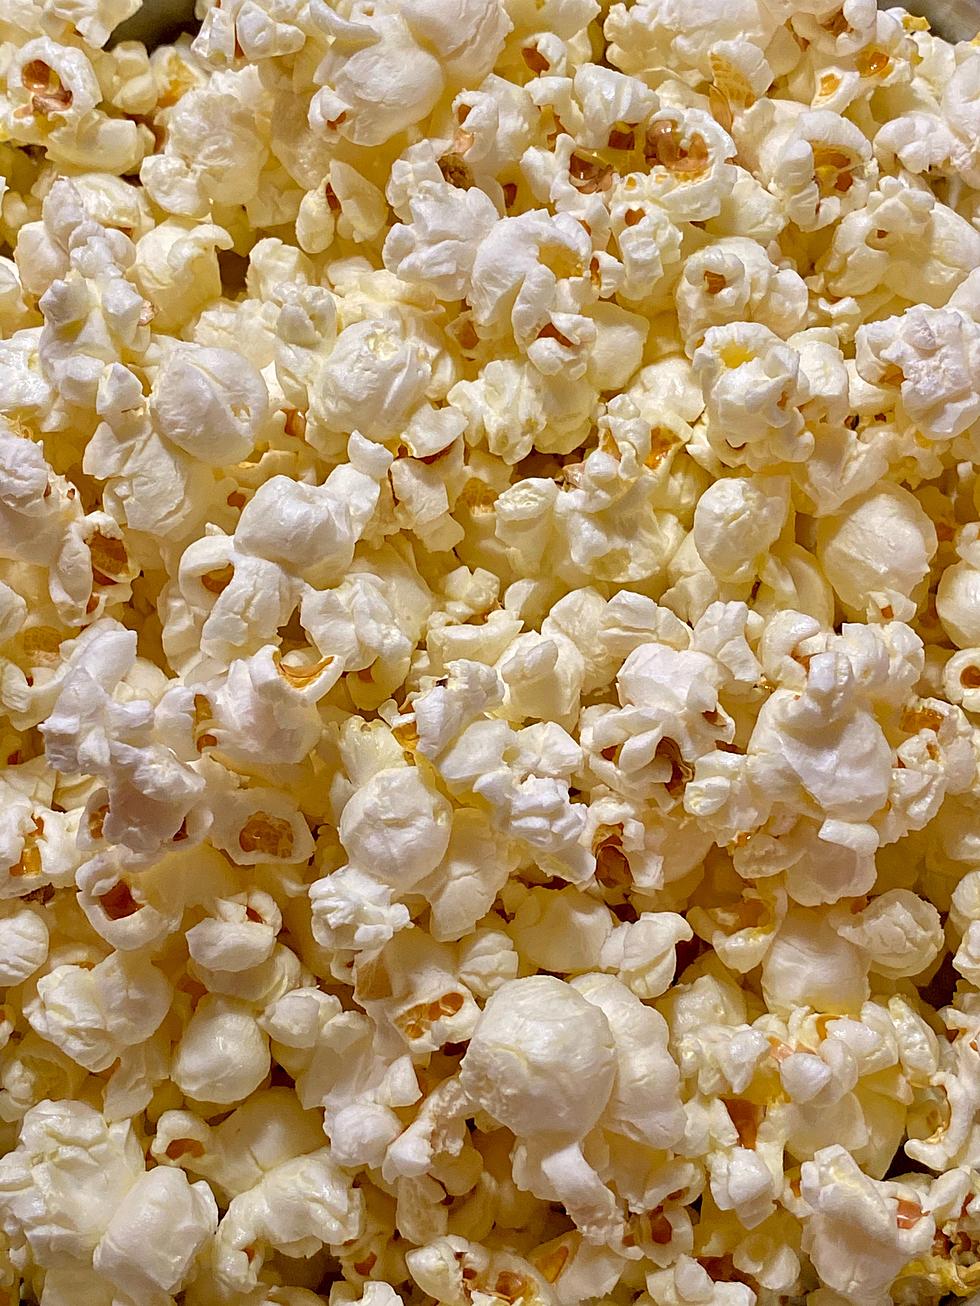 Lubbock, If You Like Popcorn, You&#8217;ll Love This New Business Coming Soon